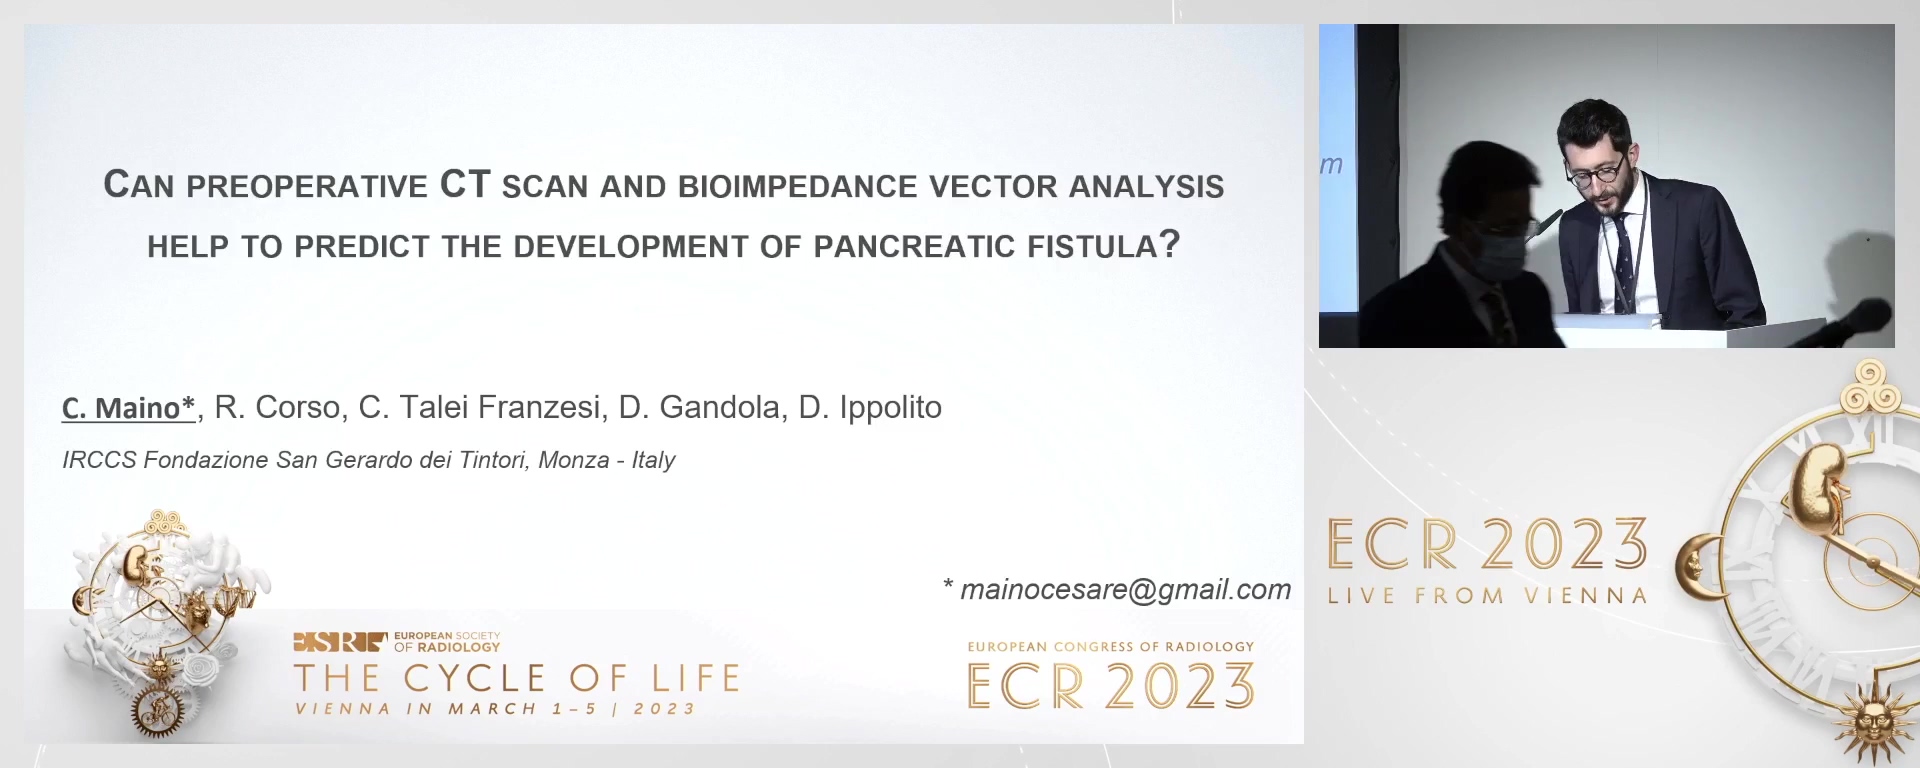 Can preoperative CT scan and bioimpedance vector analysis help to predict the development of postoperative pancreatic fistula?